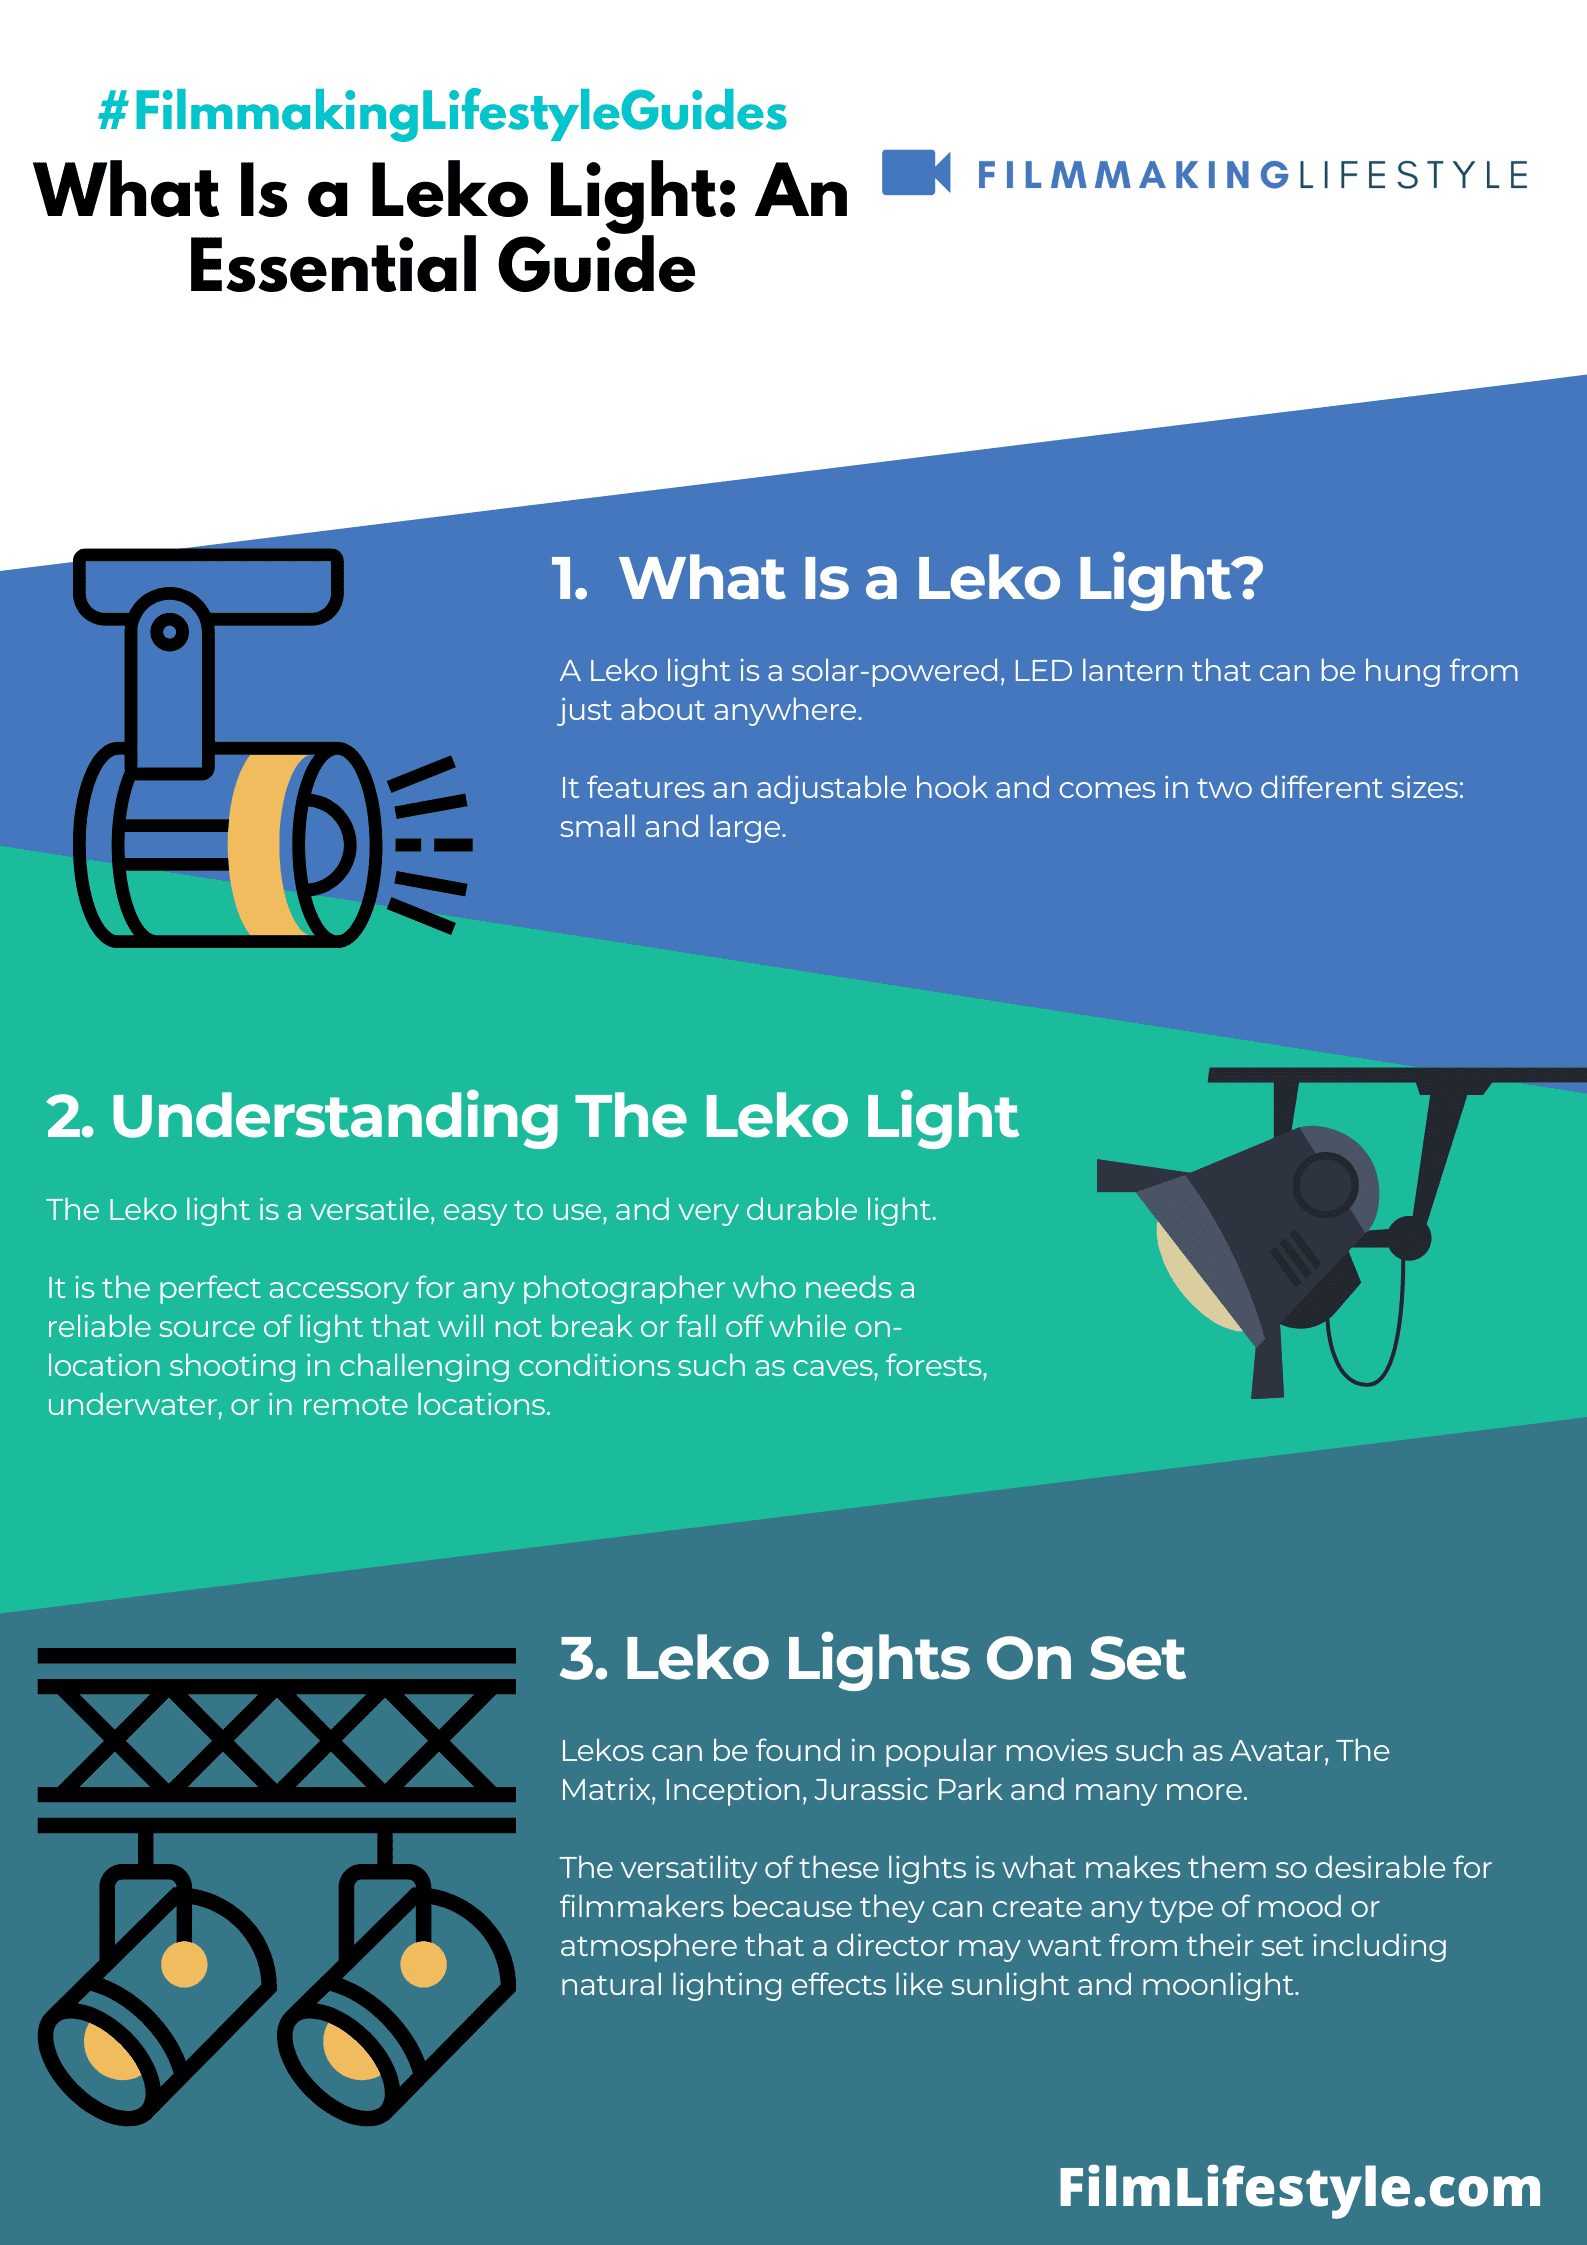 What Is a Leko Light